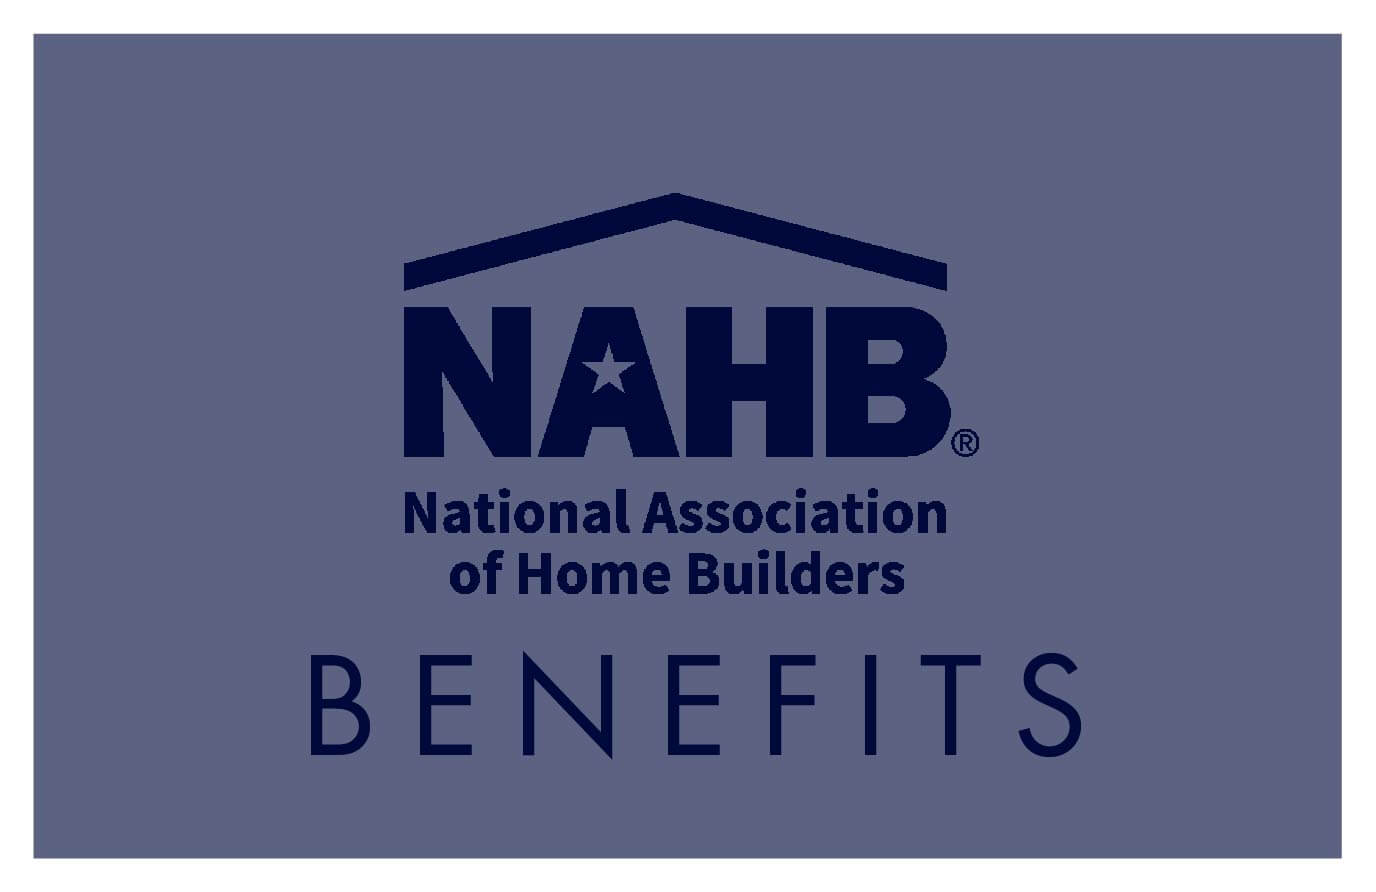 National Association of Home Builders Benefits graphic